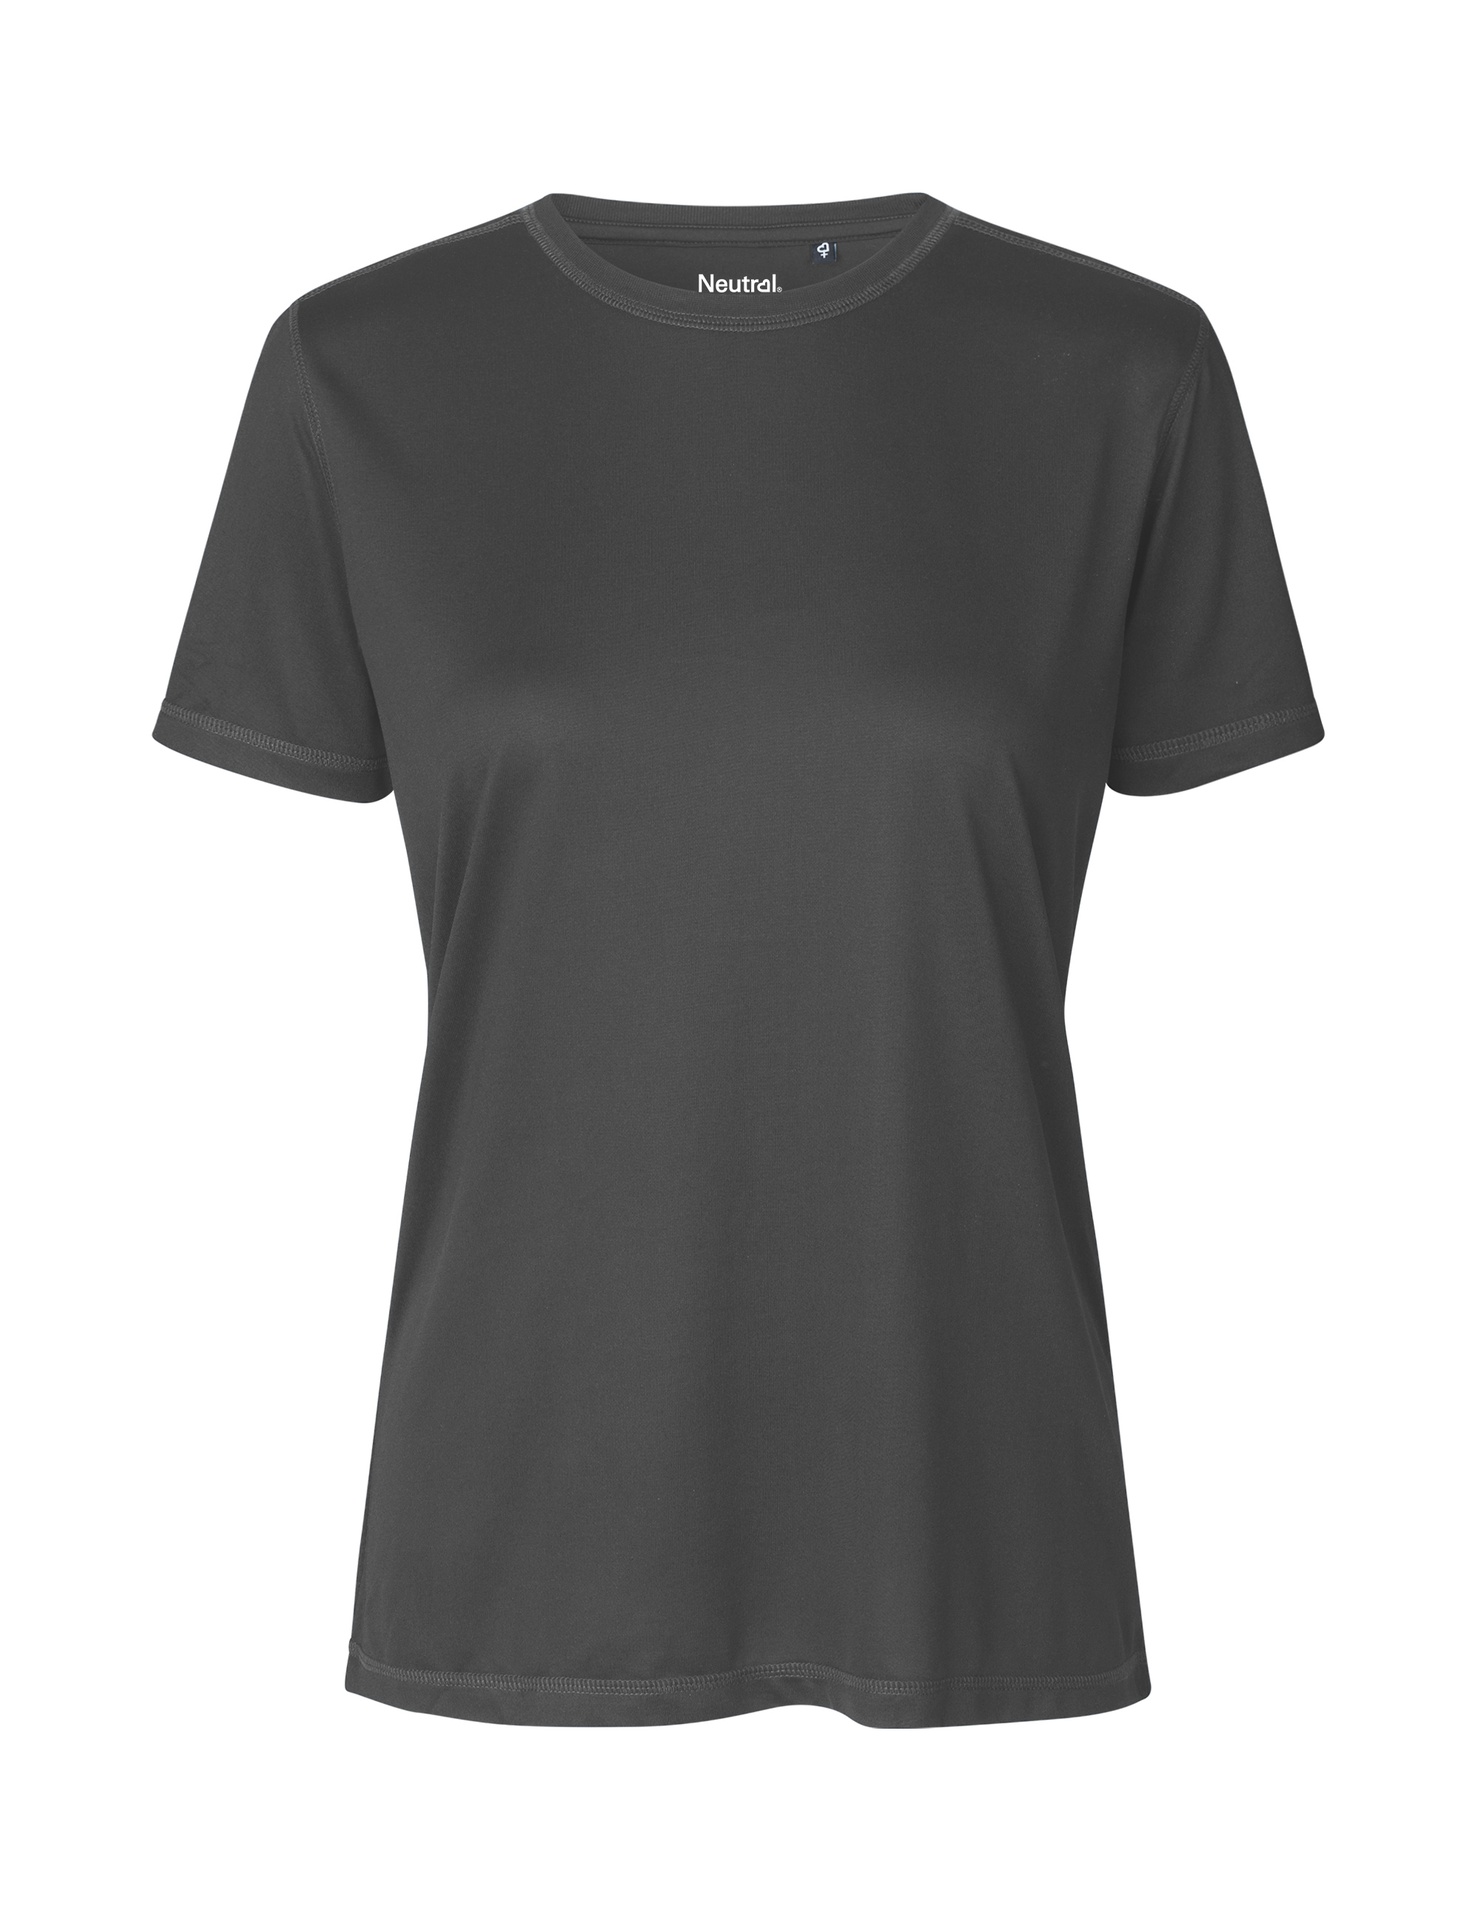 [PR/05218] Ladies Recycled Performance T-Shirt (Charcoal 06, M)